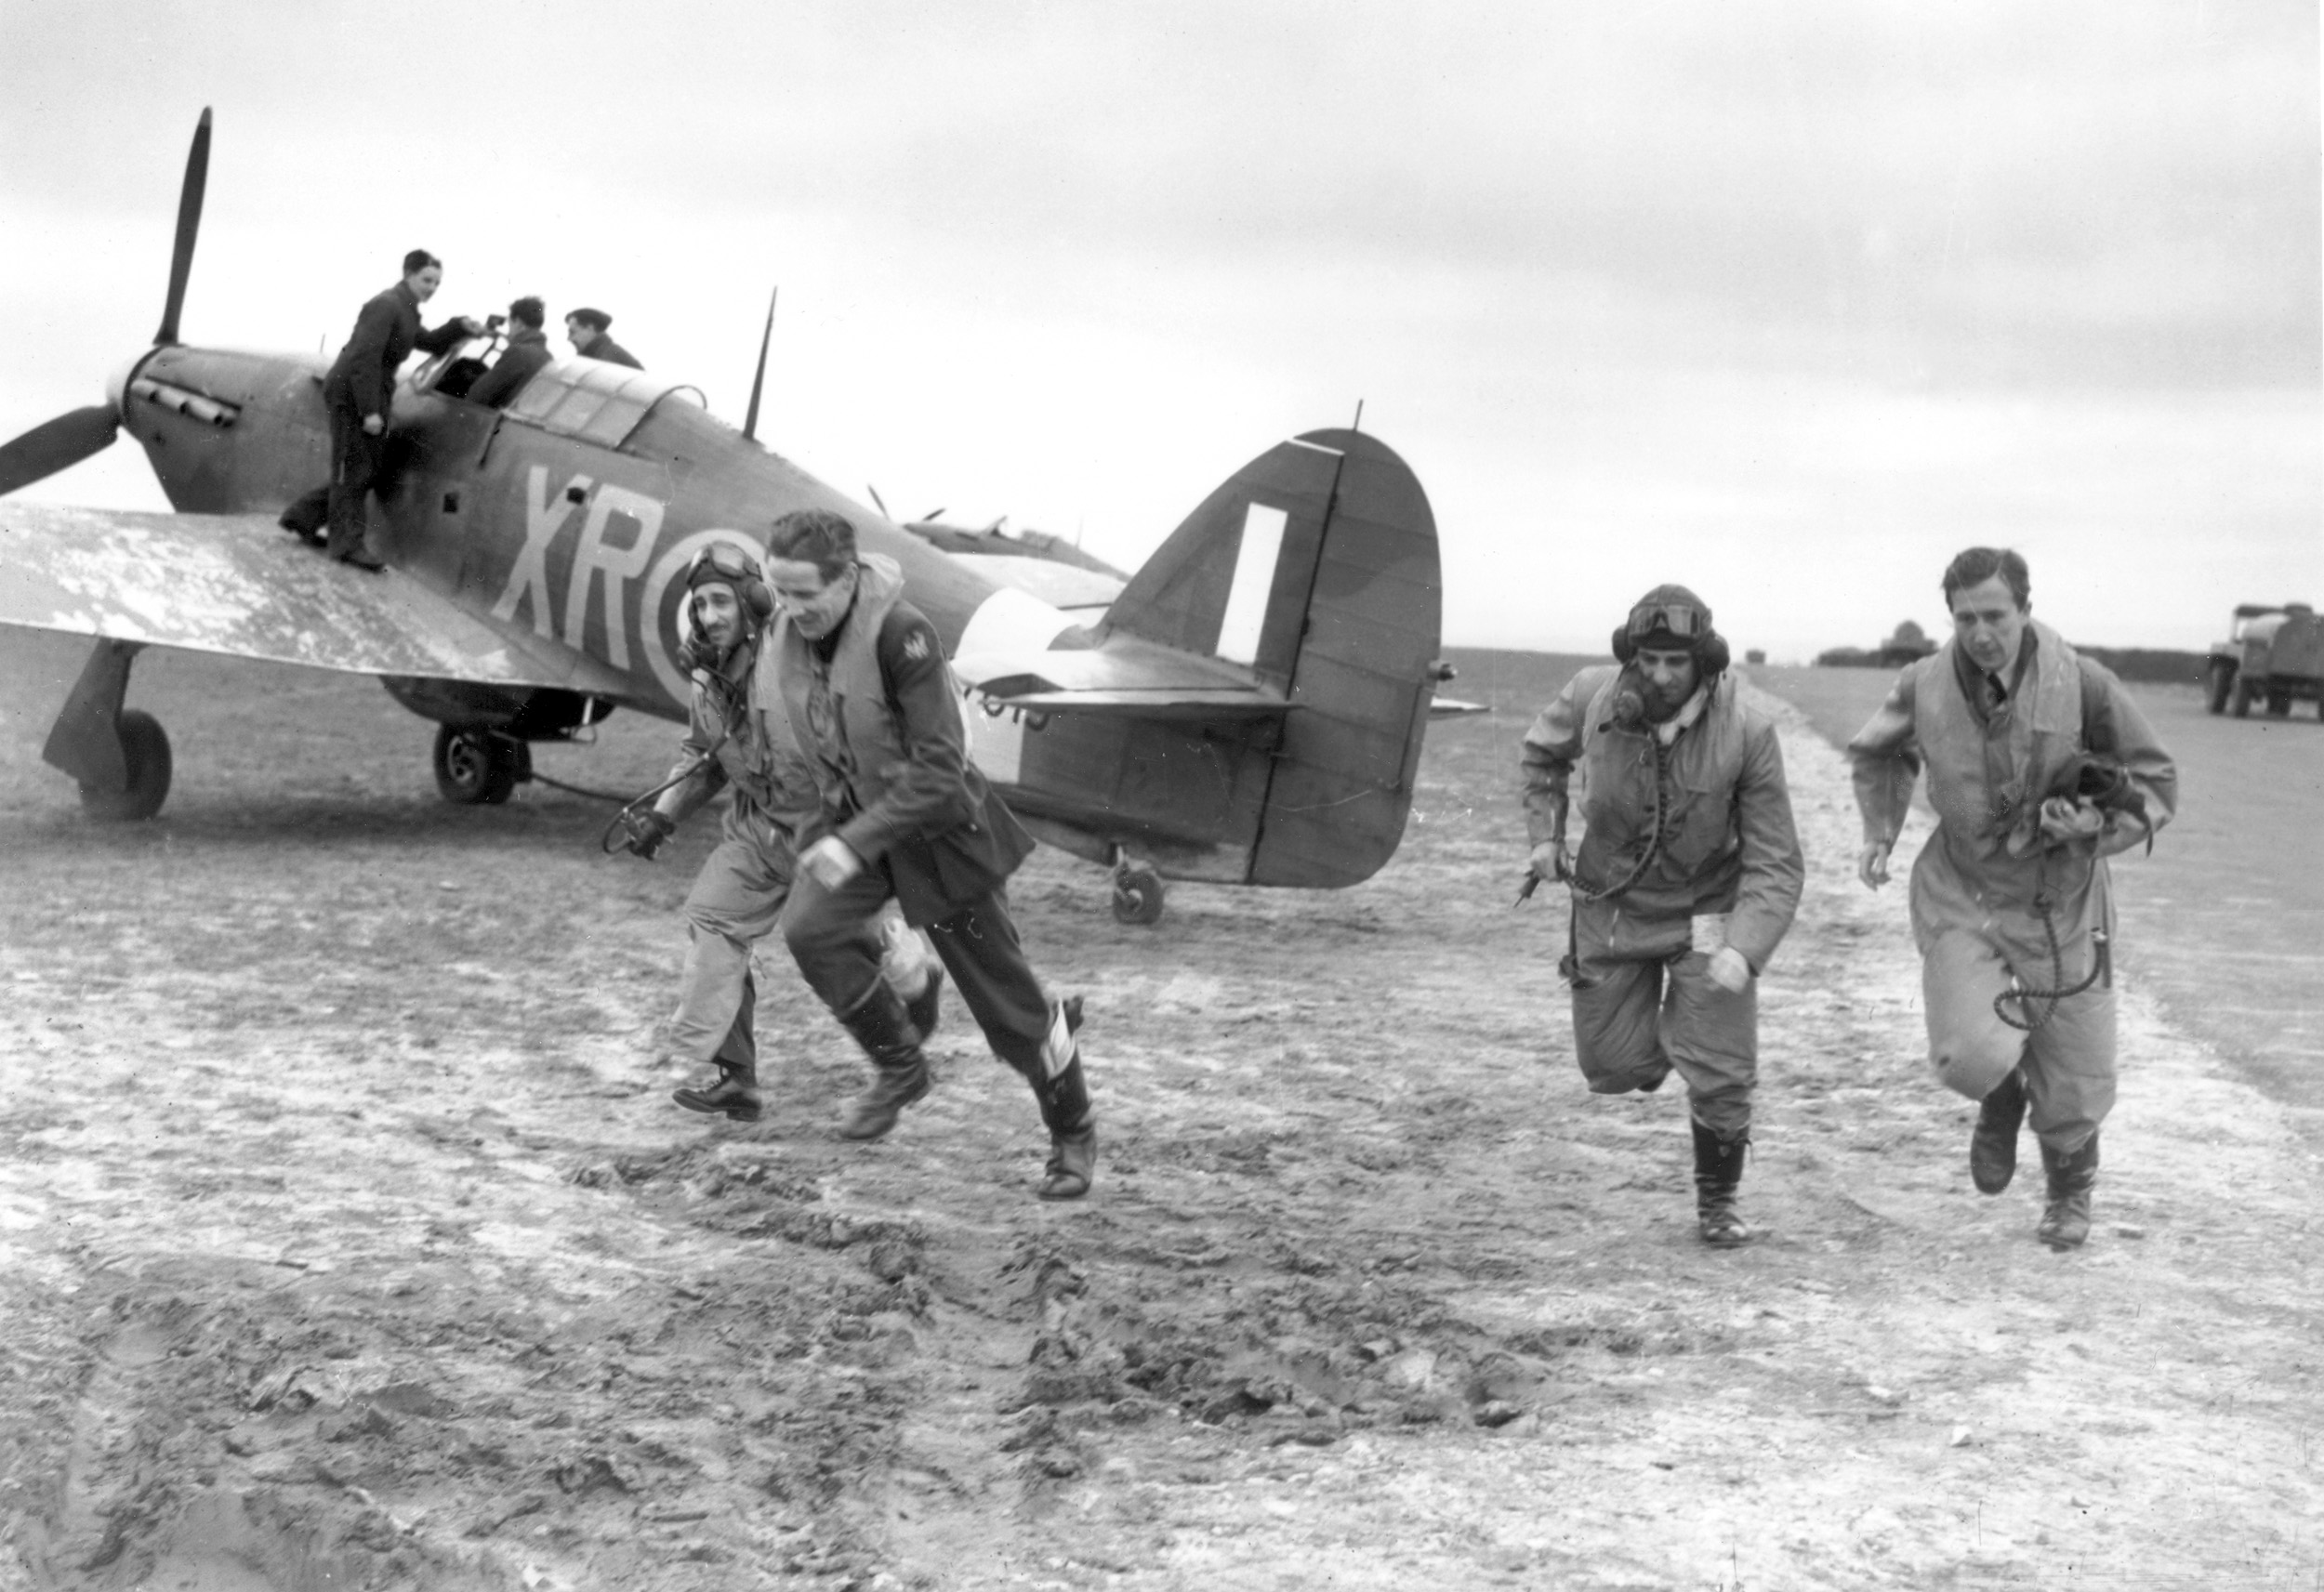 As one aviator is strapped into the cockpit of his Hawker Hurricane fighter, other pilots of the Eagle Squadron dash to the aircraft as an alarm is sounded during the Battle of Britain.